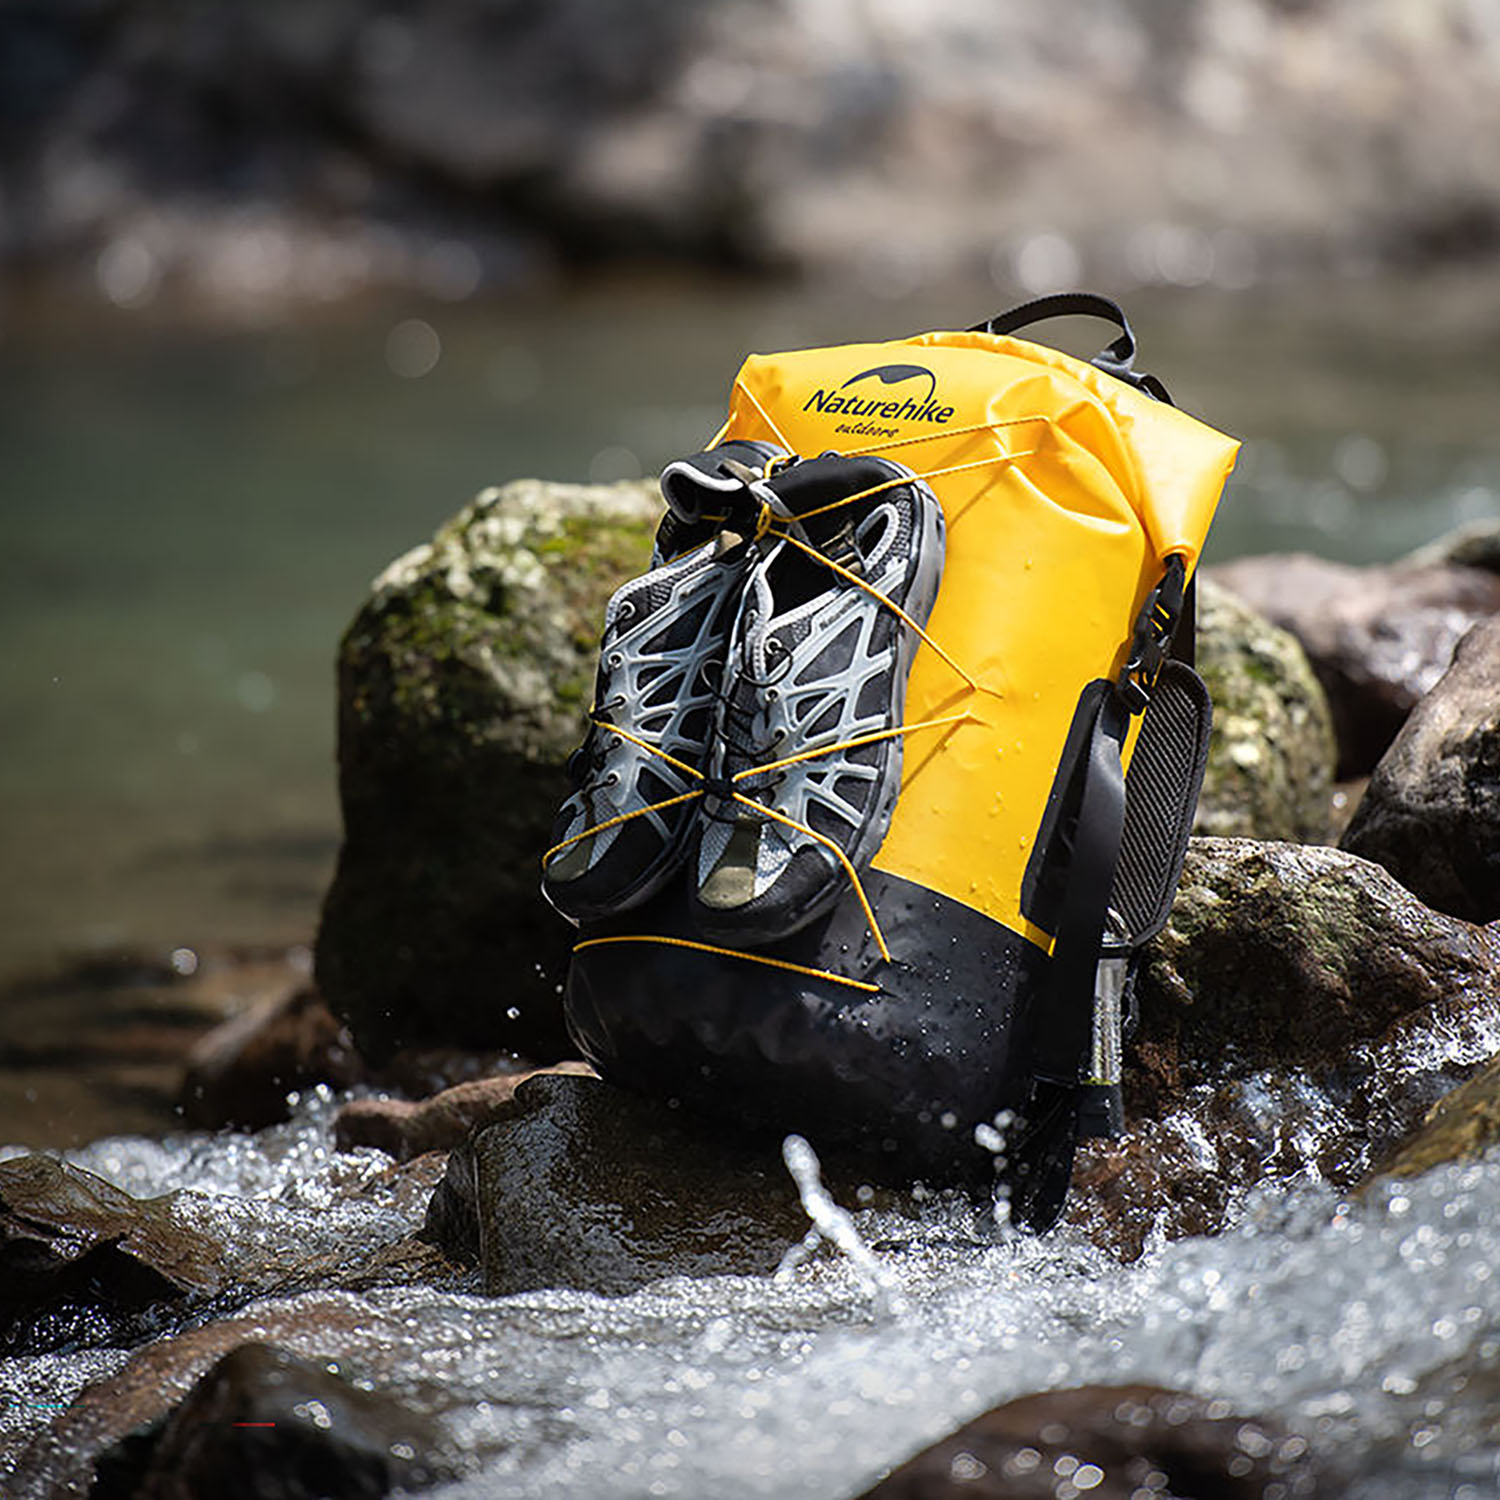 Рюкзак Naturehike TB03-shimmer-TPU wet and dry separation waterproof bag 20L without shoes Lemon Yellow